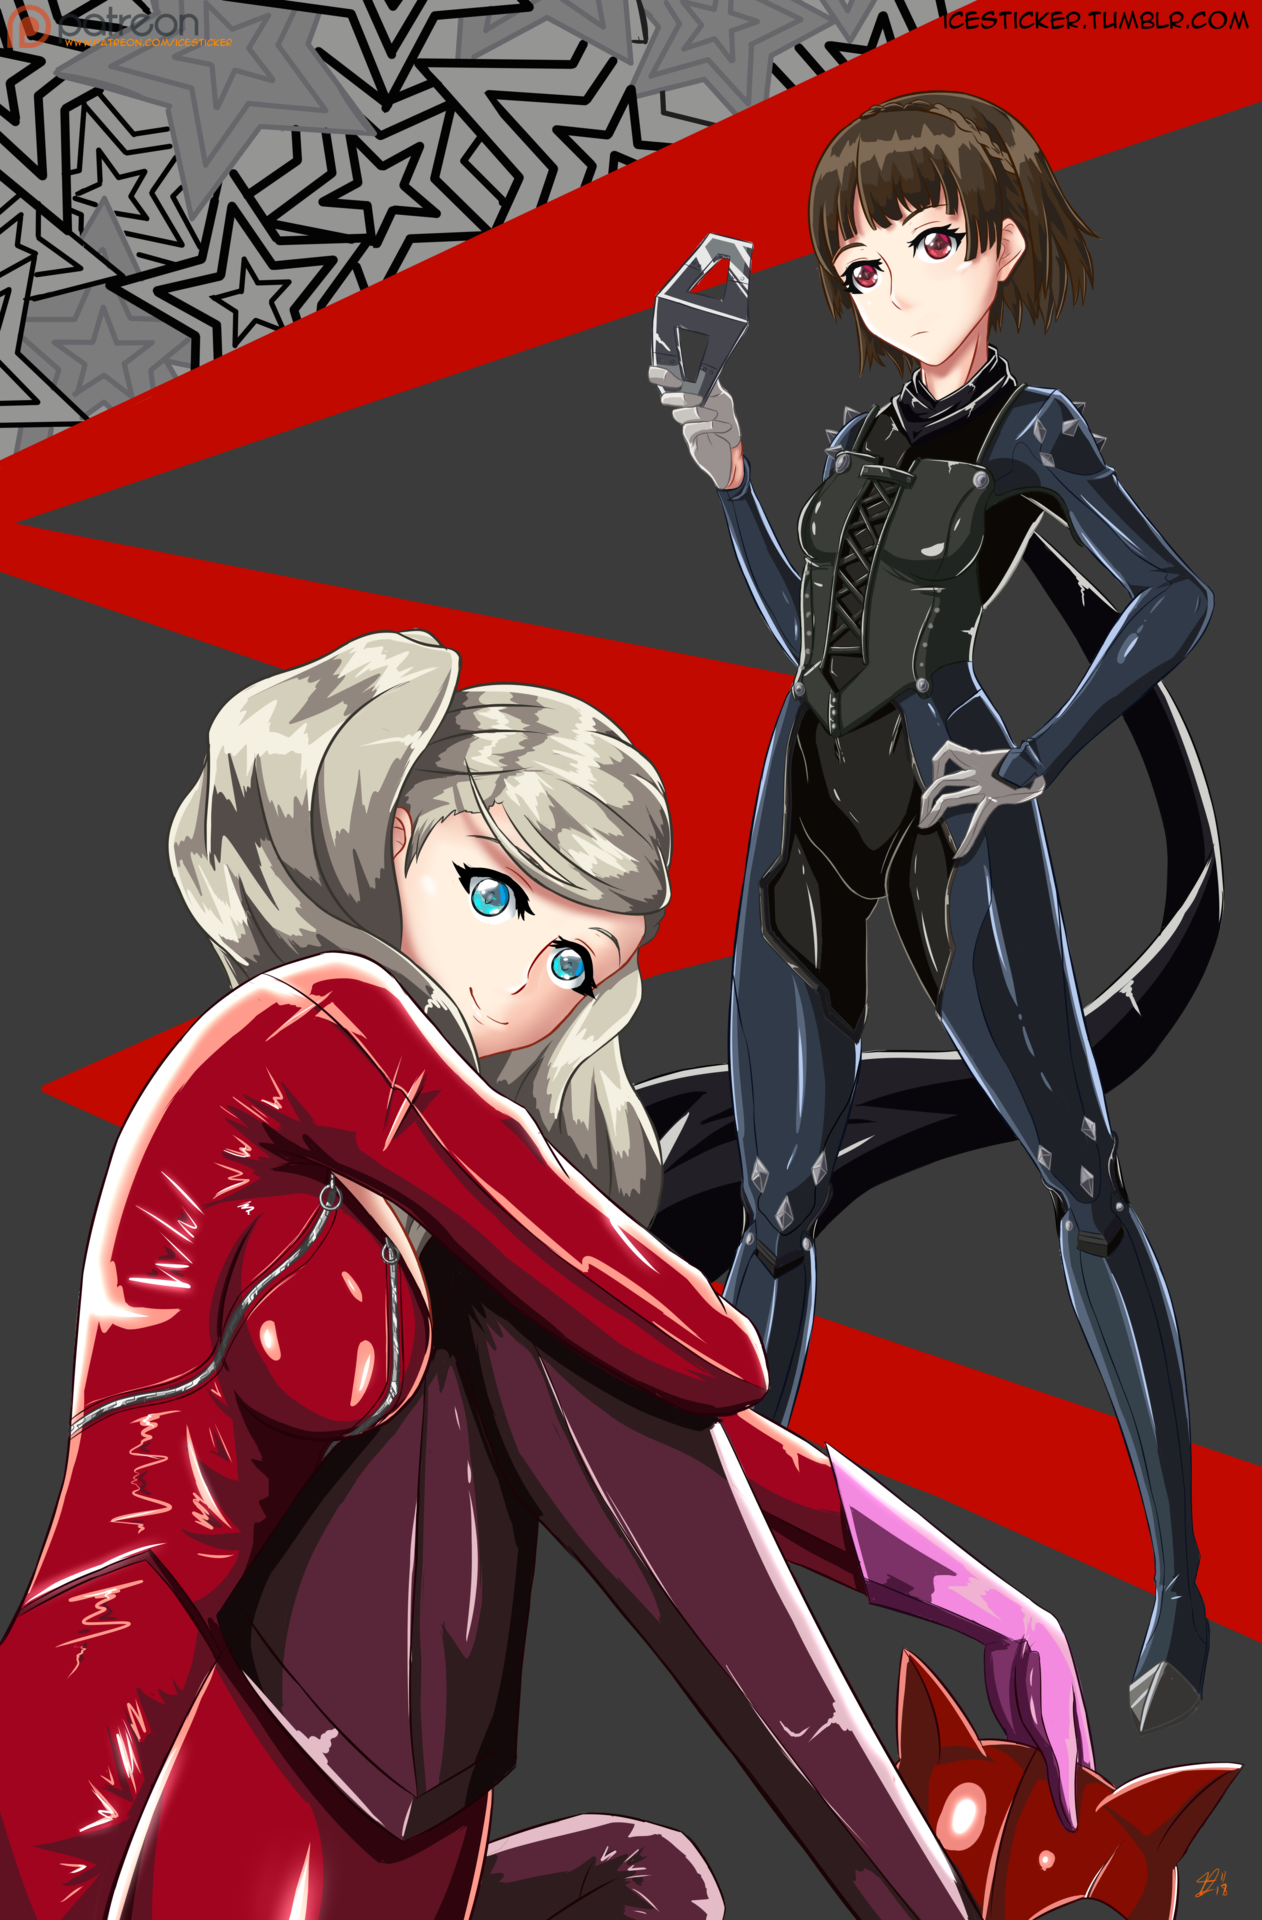 Otakon Print - Persona 5 Ann and Makoto  I will be releasing all the images in the